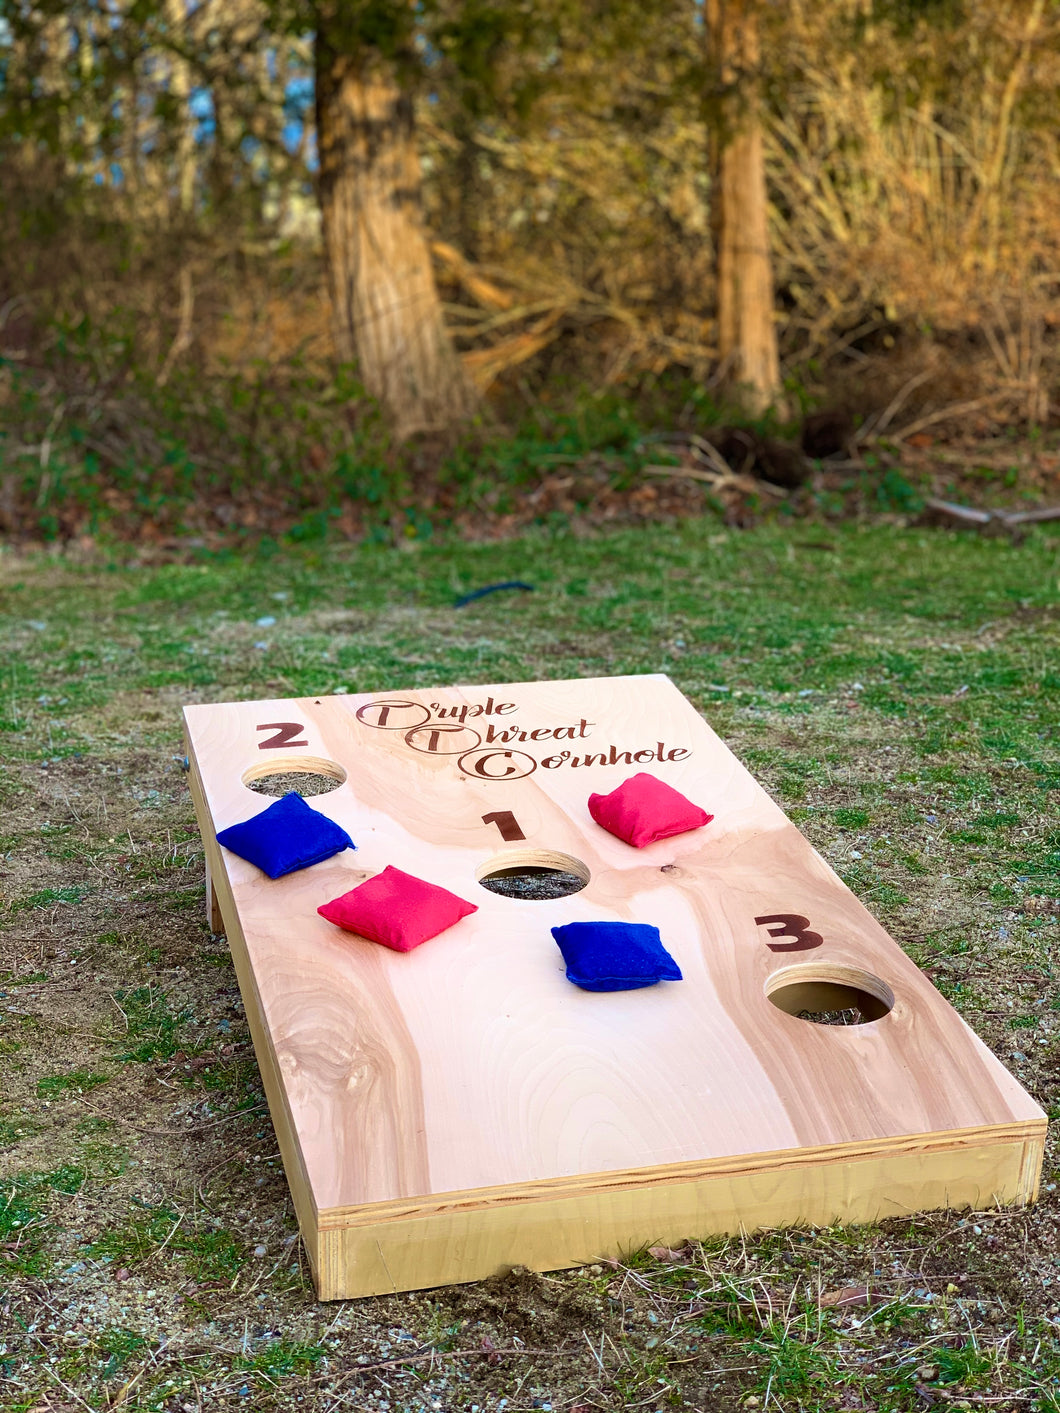 triple threat cornhole yard game with red and blue bags